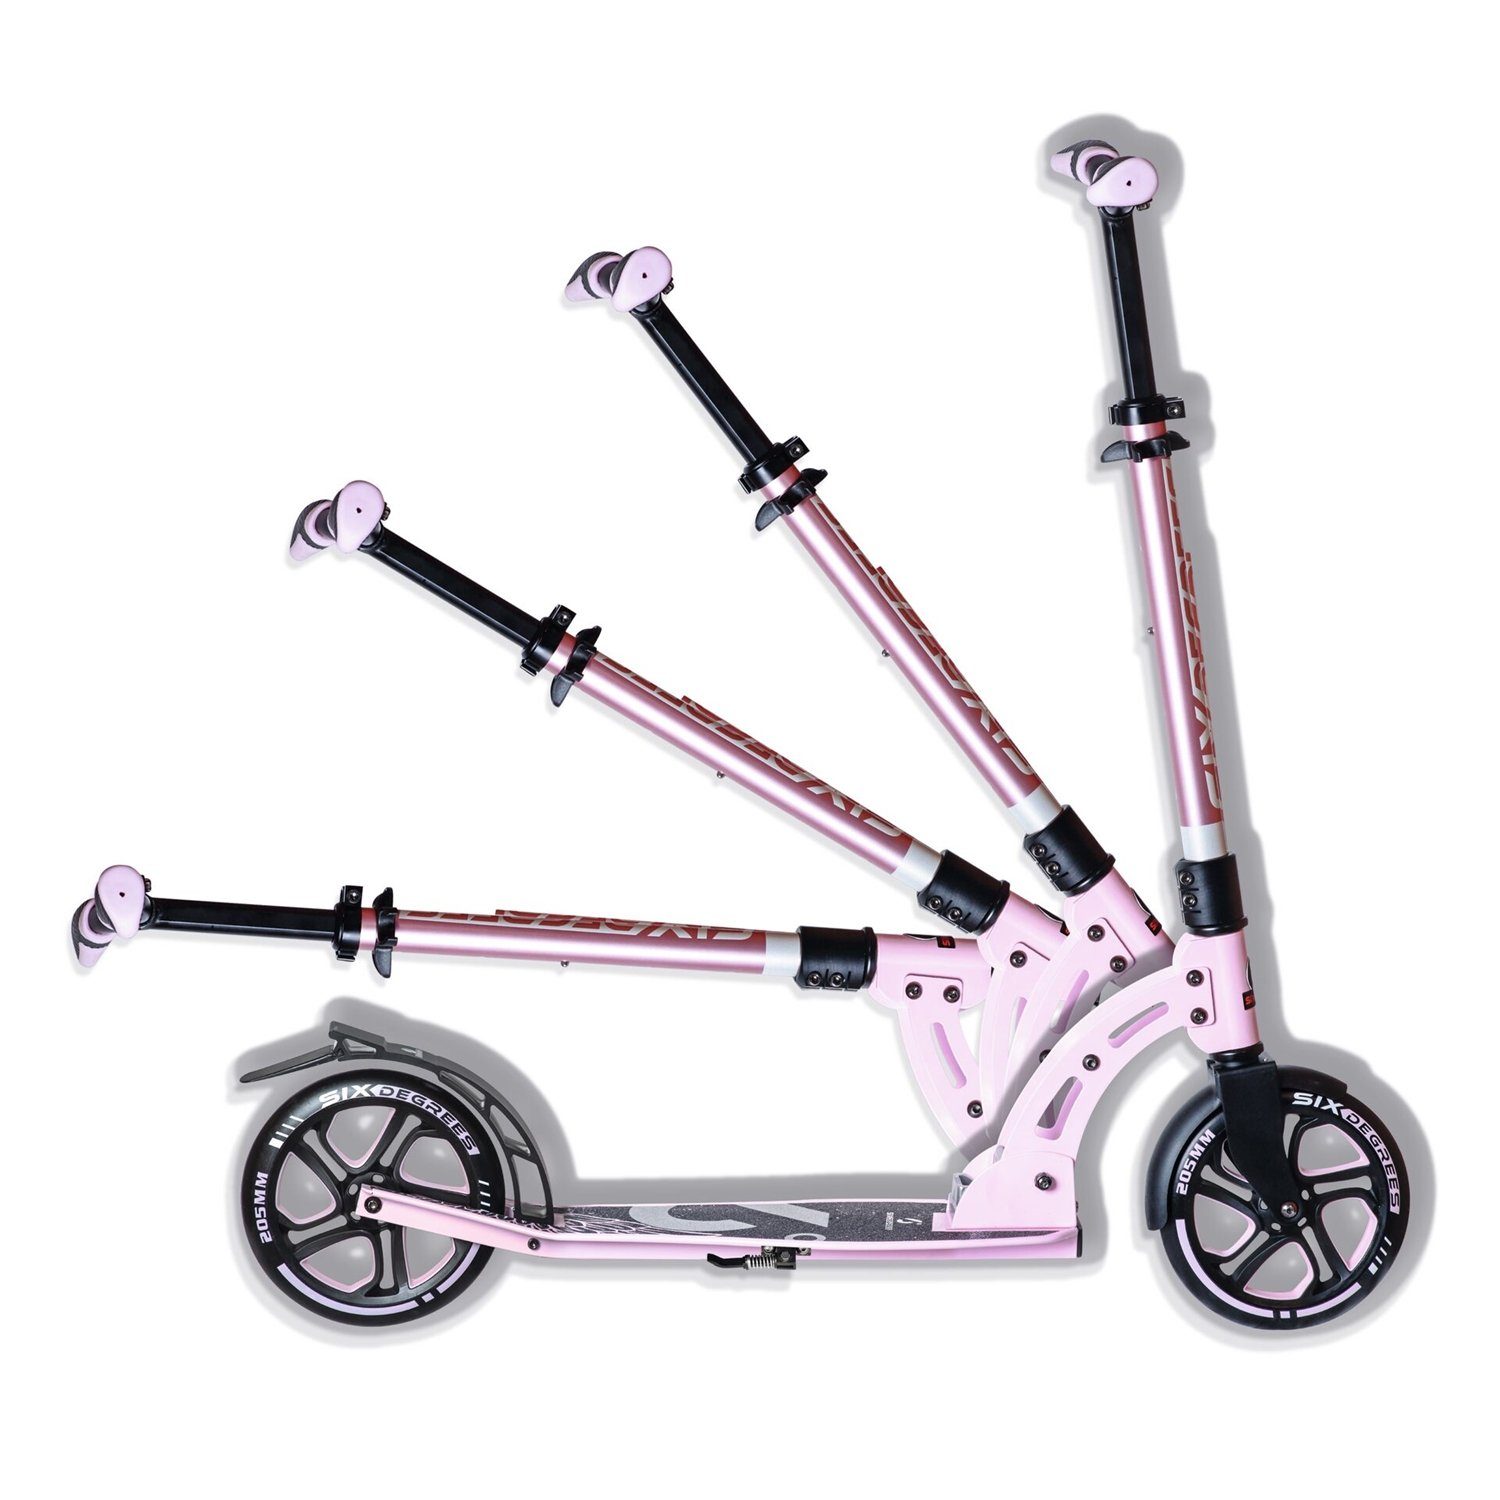 Scooter sports & 569 pastell-pink SIX Aluminium 205 authentic DEGREES Scooter mm toys